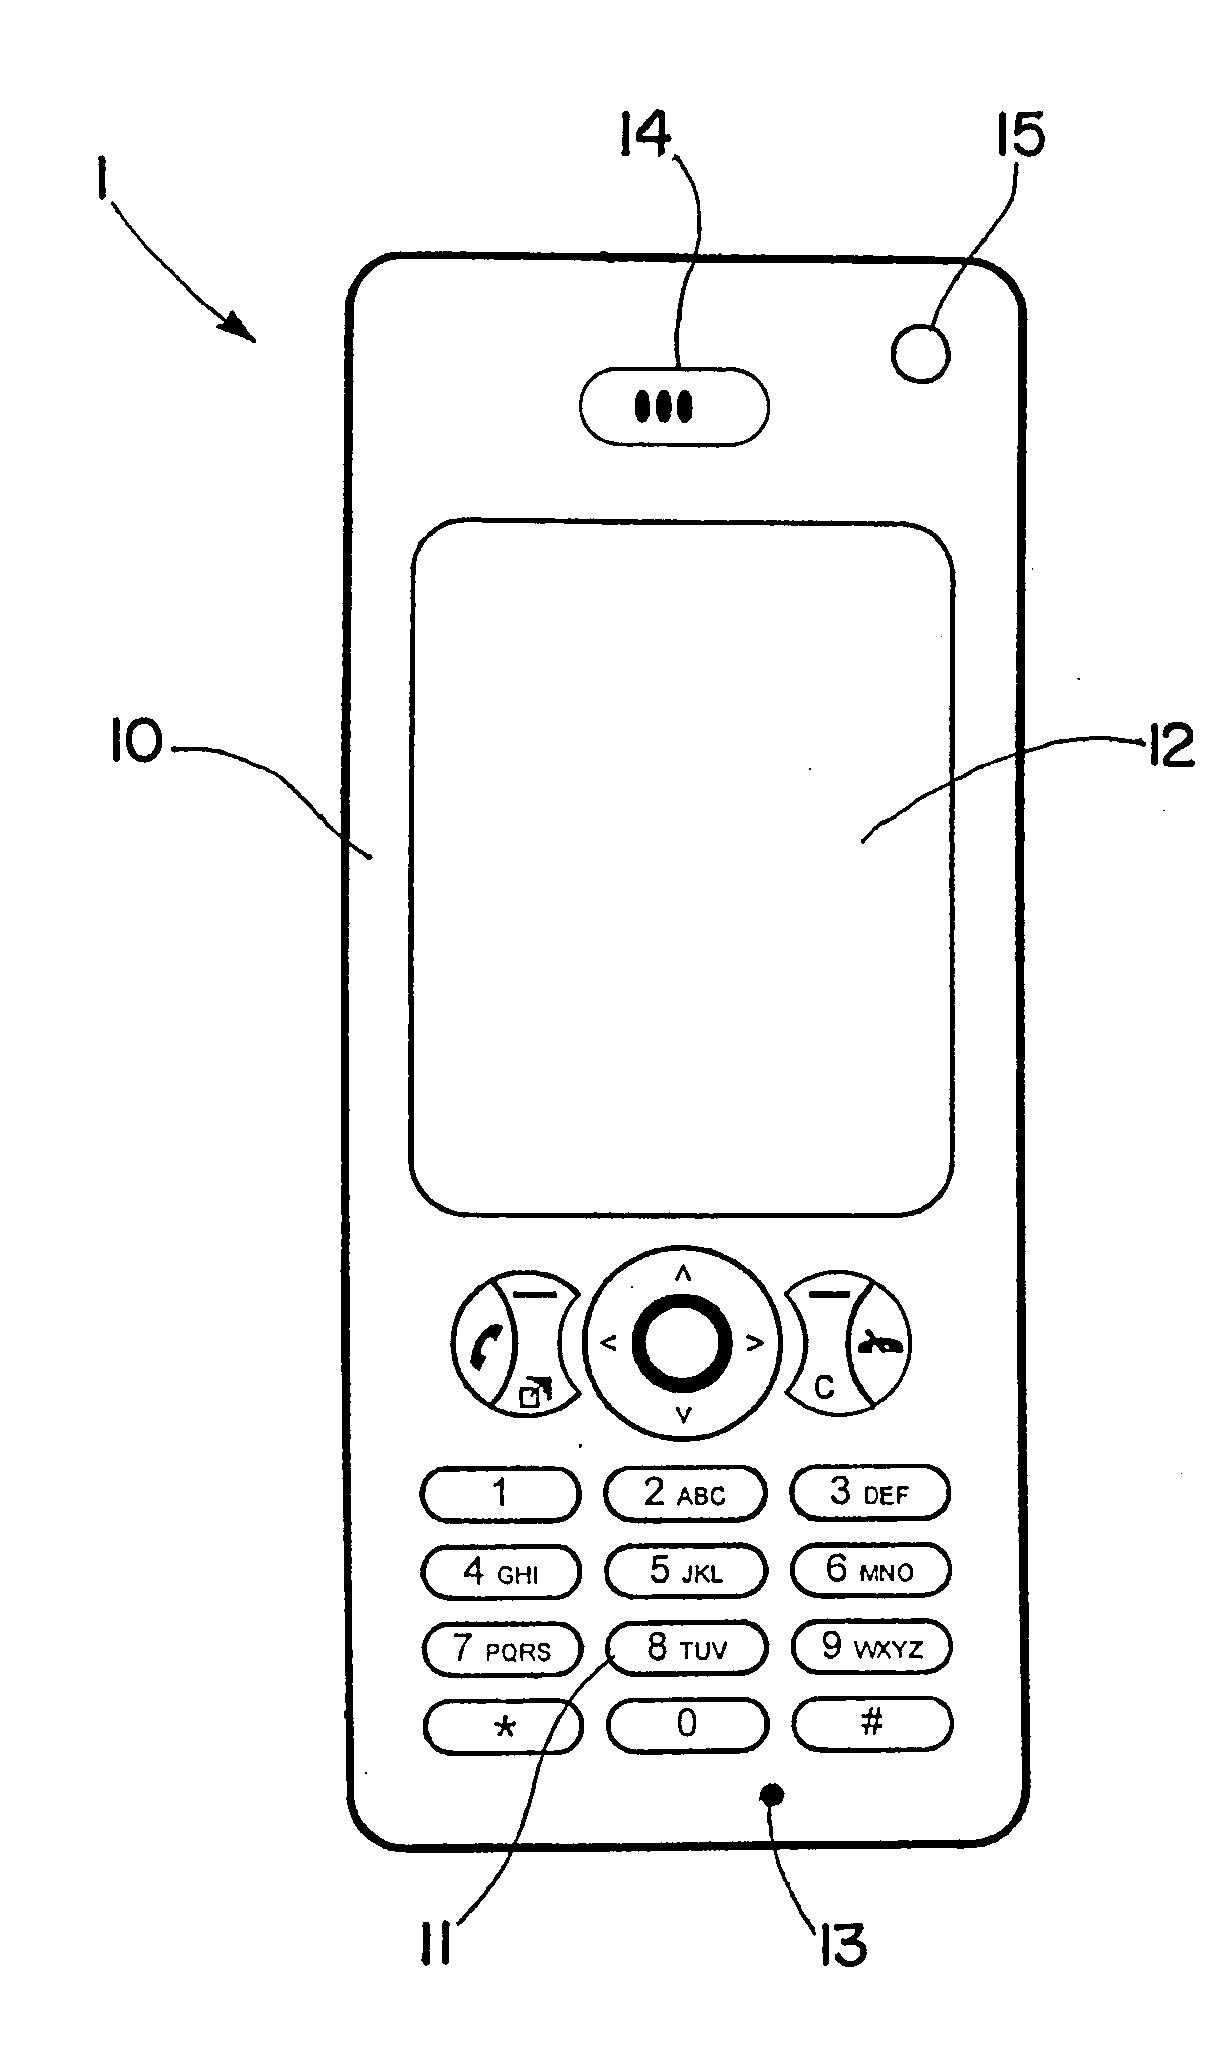 Metal cover for portable electronic device